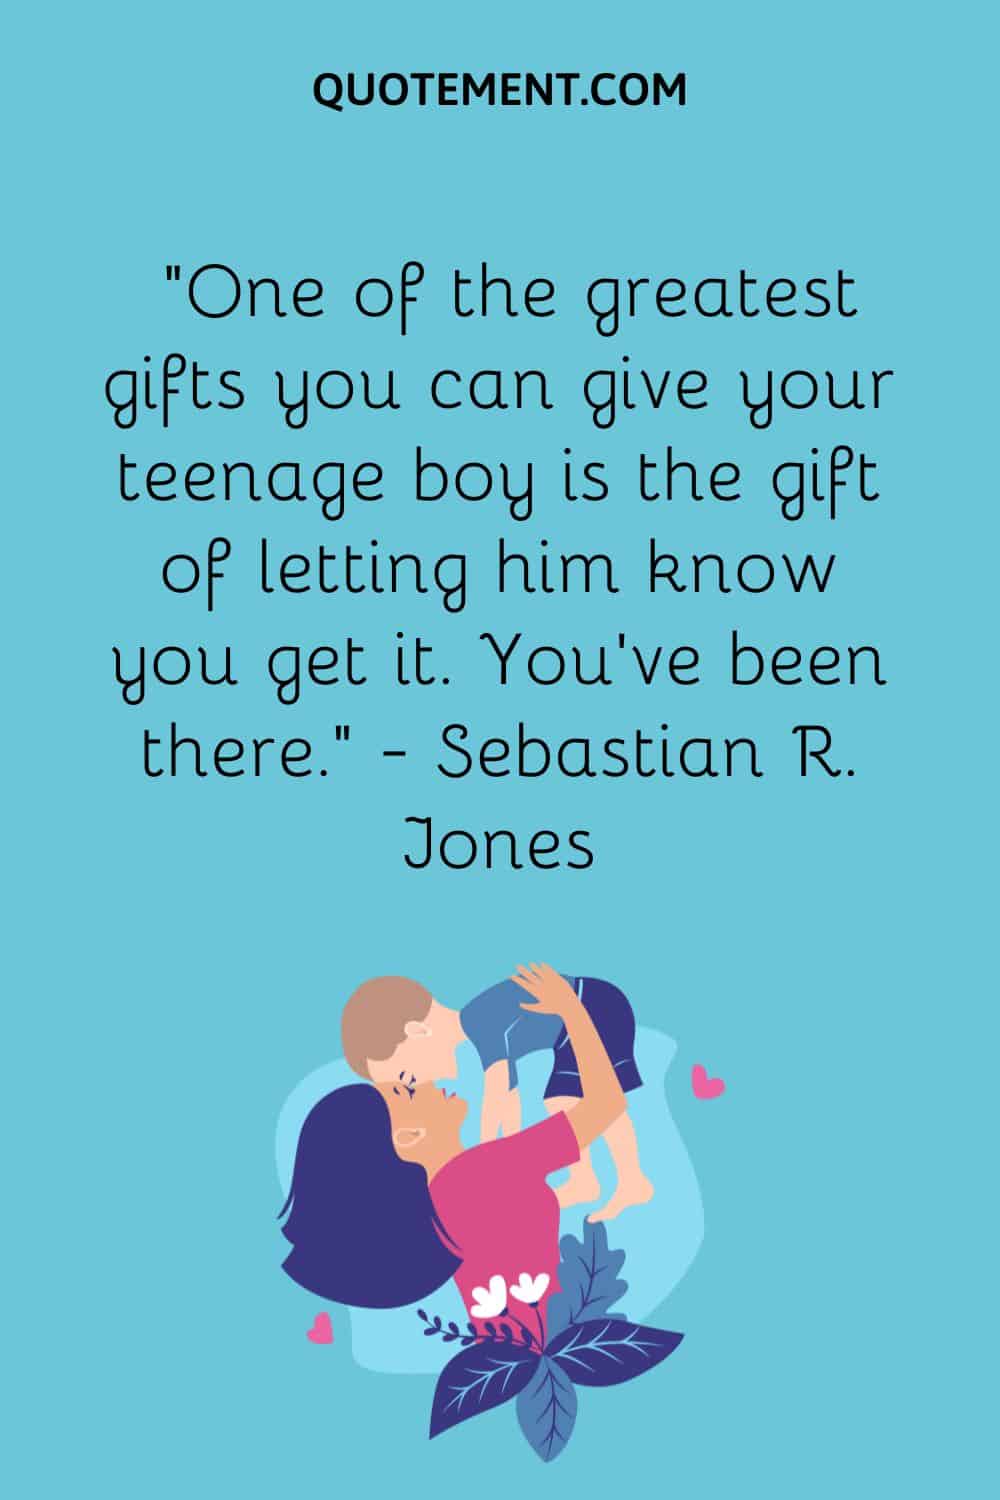 “One of the greatest gifts you can give your teenage boy is the gift of letting him know you get it. You’ve been there.” — Sebastian R. Jones